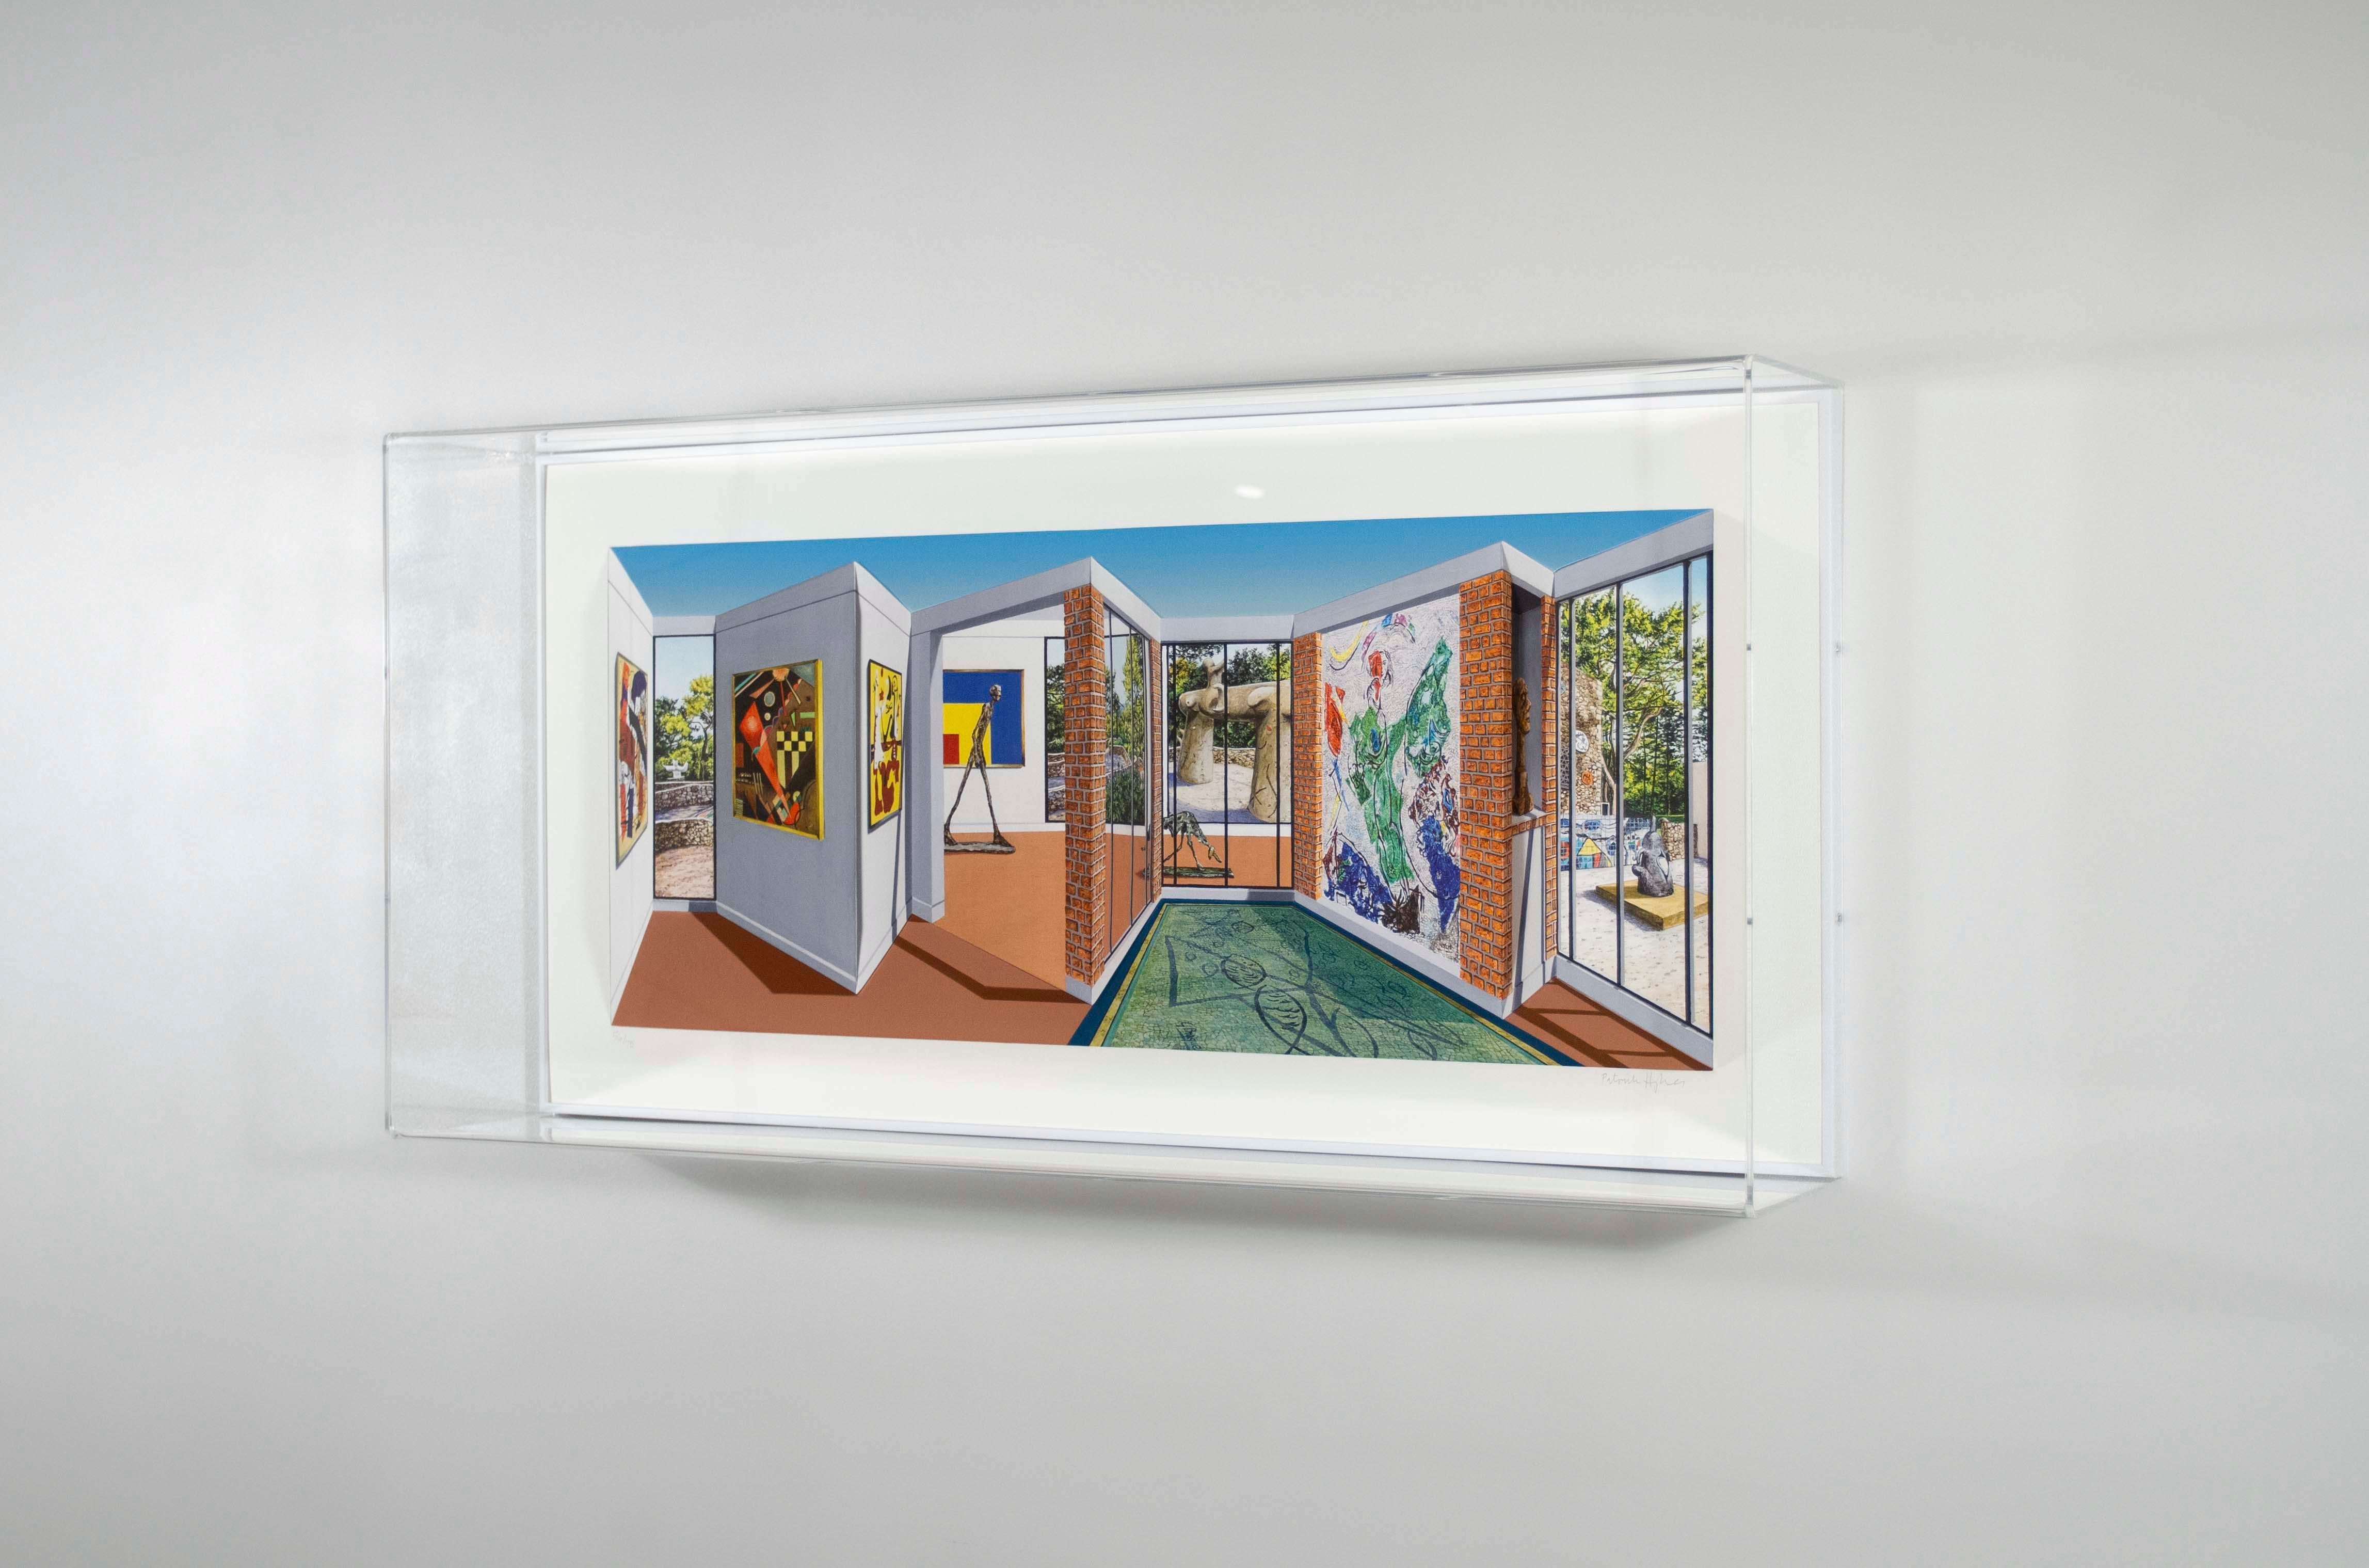 Patrick Hughes (b.1939)
Maeght
2019
hand painted multiple with archival inkjet
45 x 90 x 18 cm 
edition of 75 plus 10 AP

Price:
£7,200 GBP (inc. 20% UK VAT)

Provenance:
Direct from the artist's studio

Notes:
This work is presented in a perspex